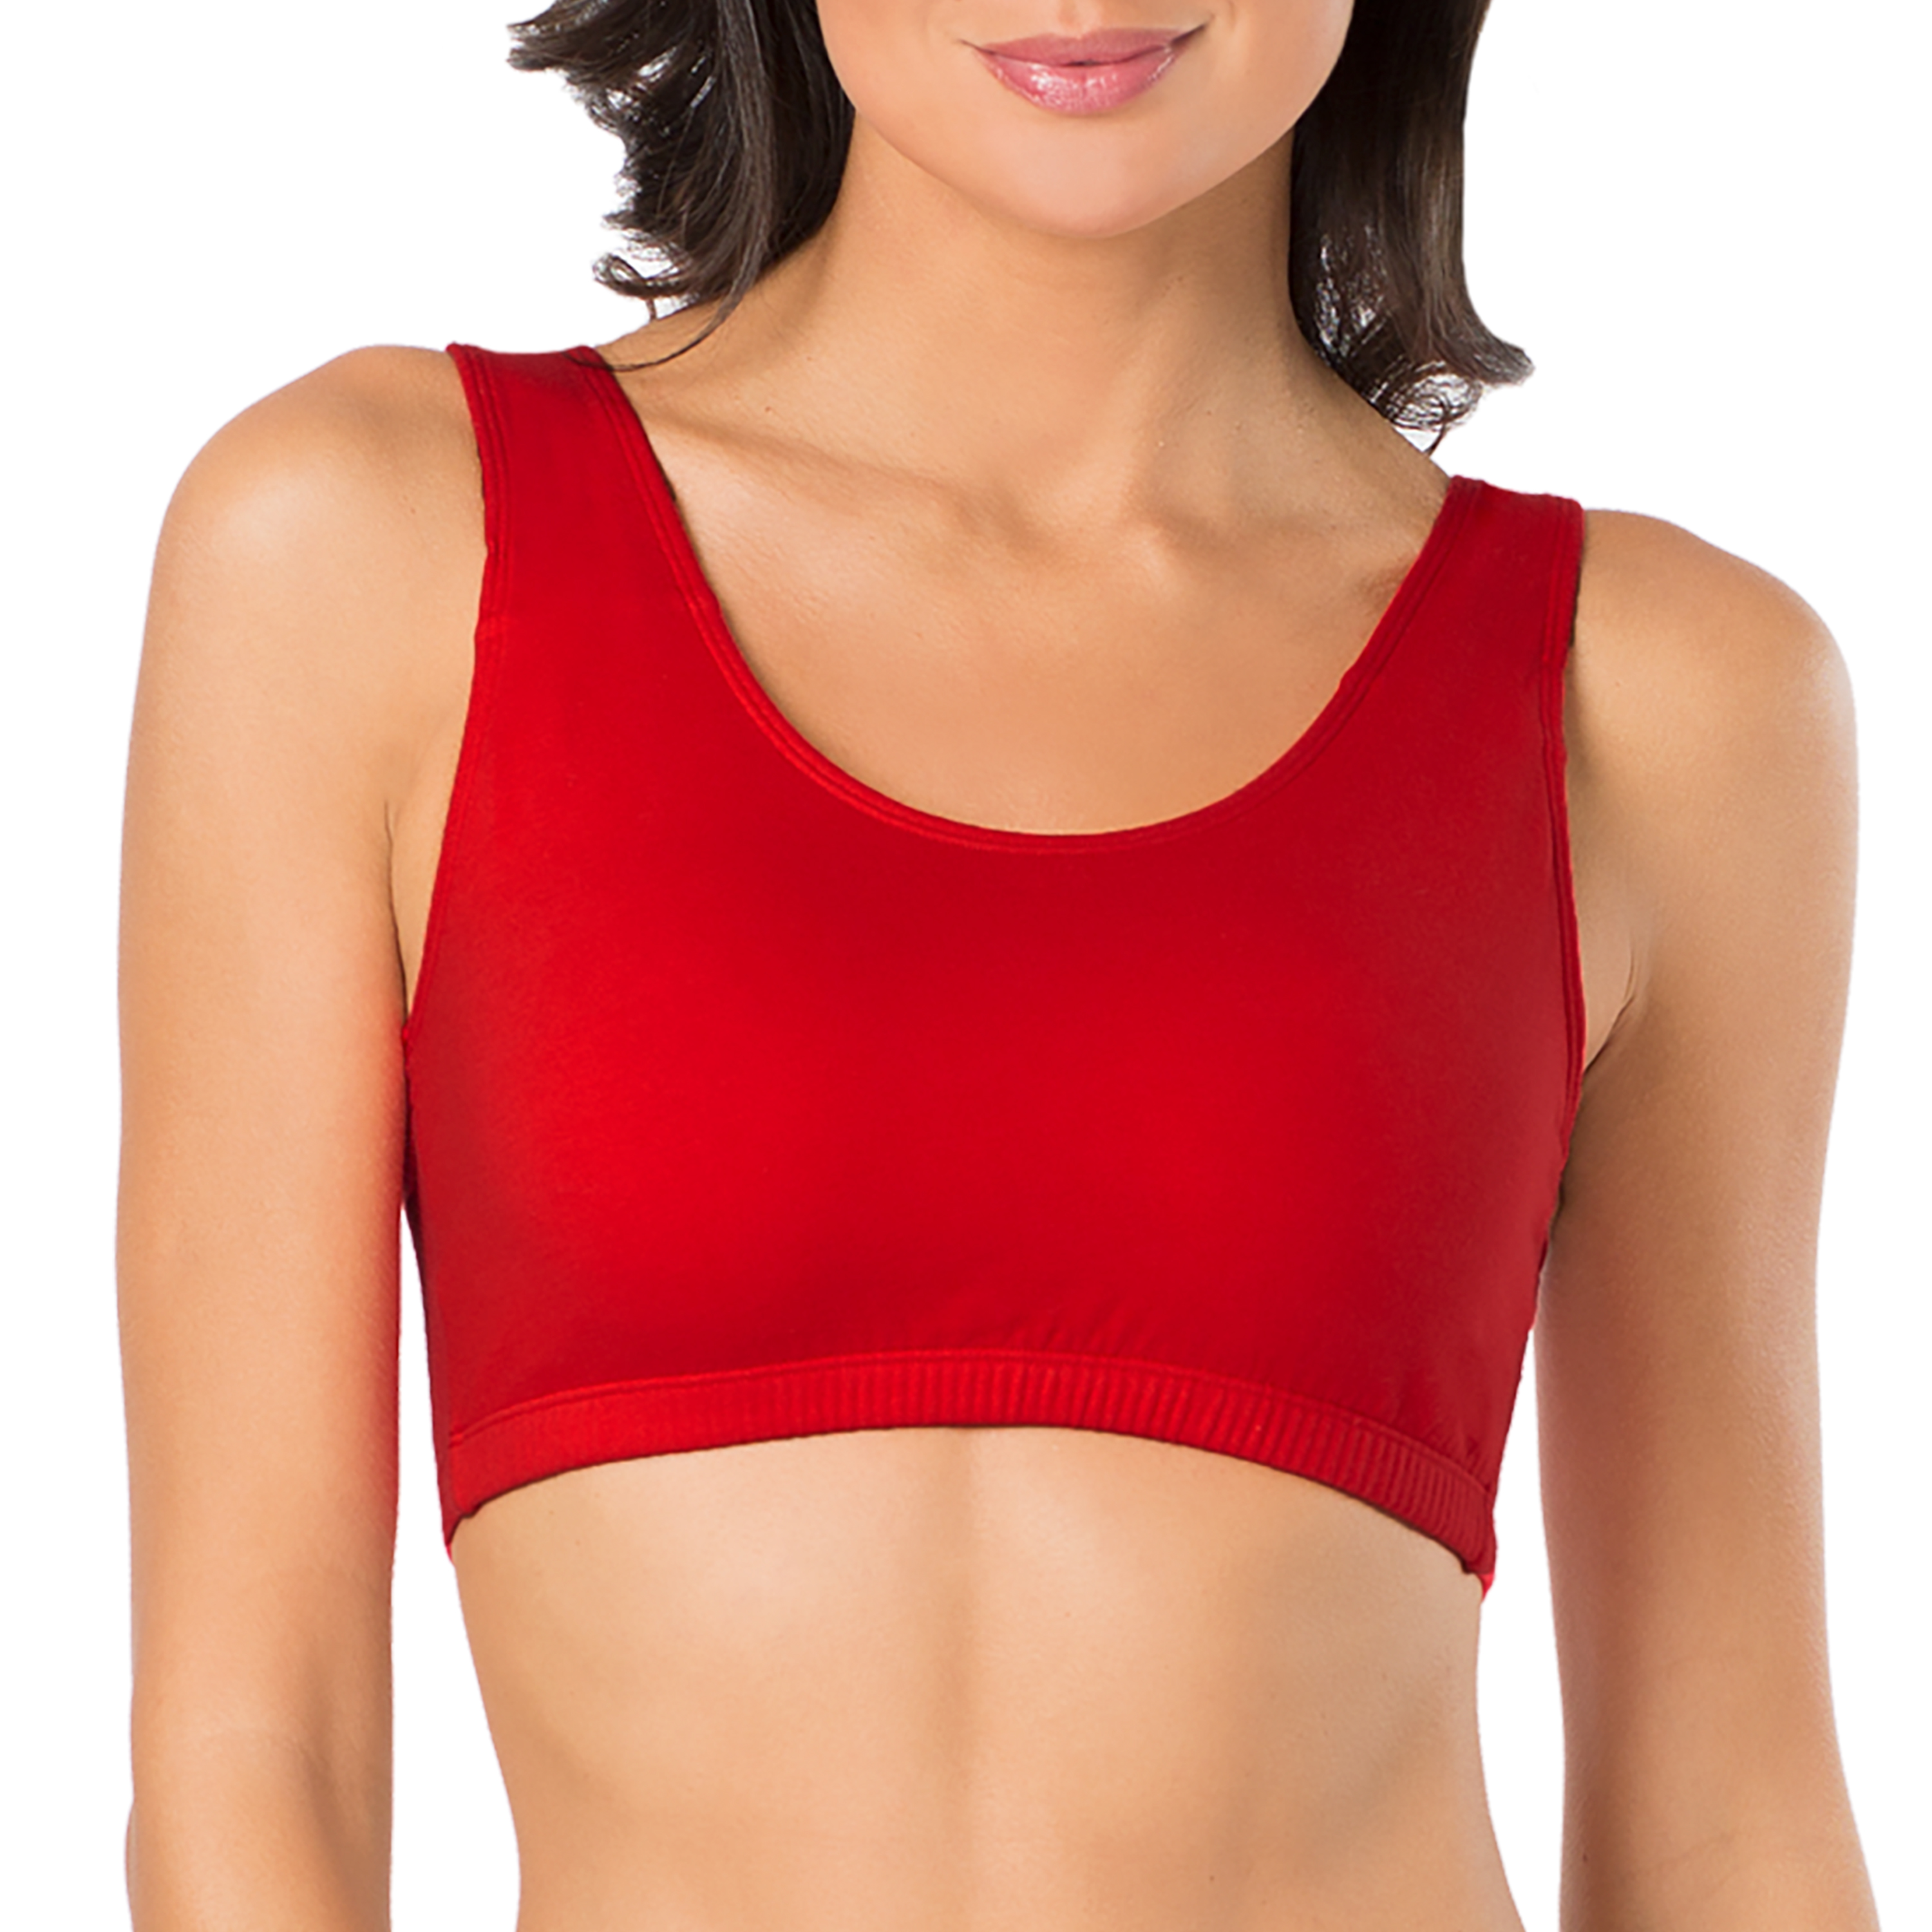 Fruit of the Loom Women's Tank Style Cotton Sports Bra, 3-Pack, Style-9012 - image 2 of 8